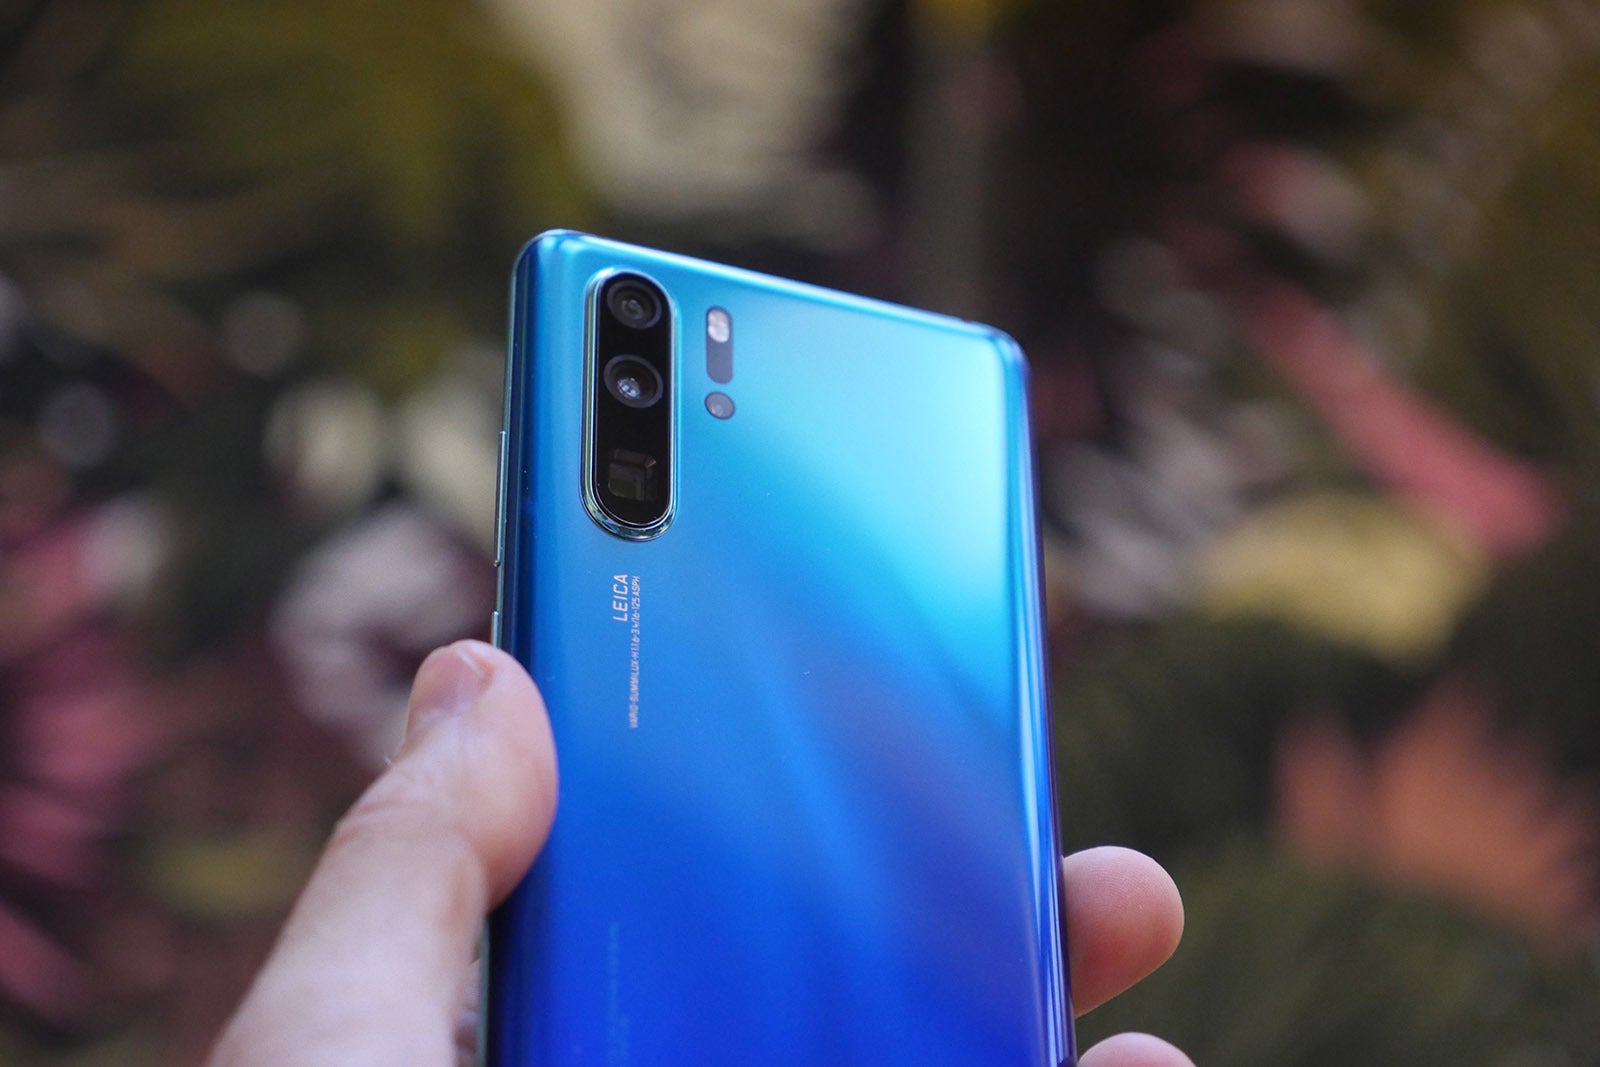 Huawei P30 Pro lands, promising to be the ultimate phone camera (hands-on)